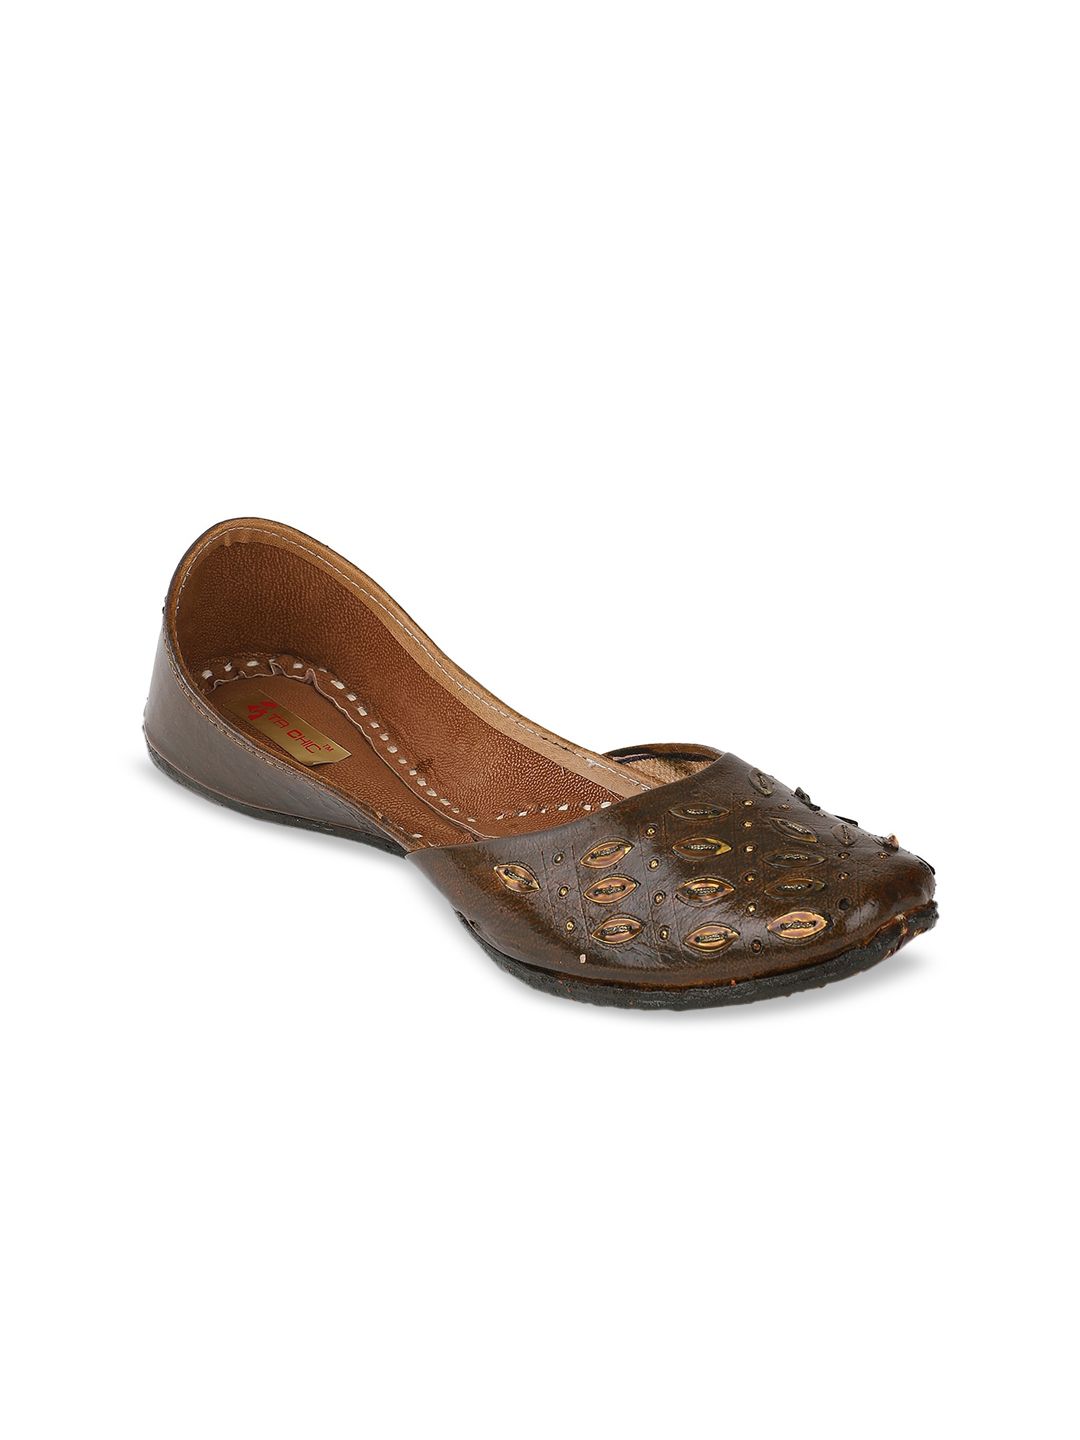 Ta Chic Women Brown Embellished Leather Ethnic Mojaris Flats Price in India